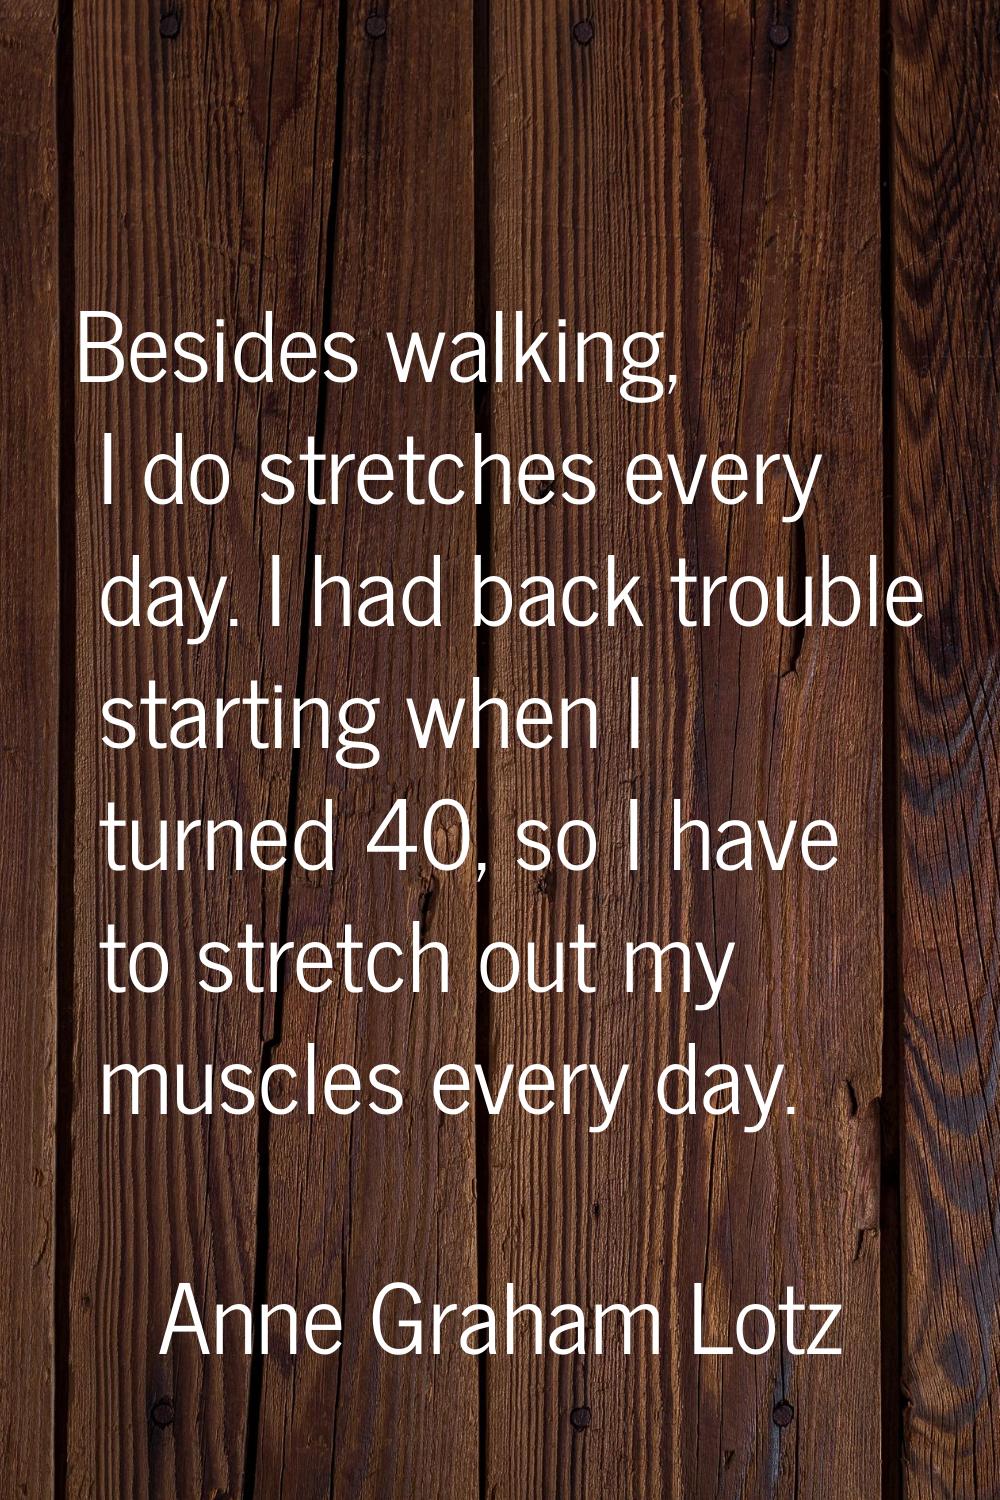 Besides walking, I do stretches every day. I had back trouble starting when I turned 40, so I have 